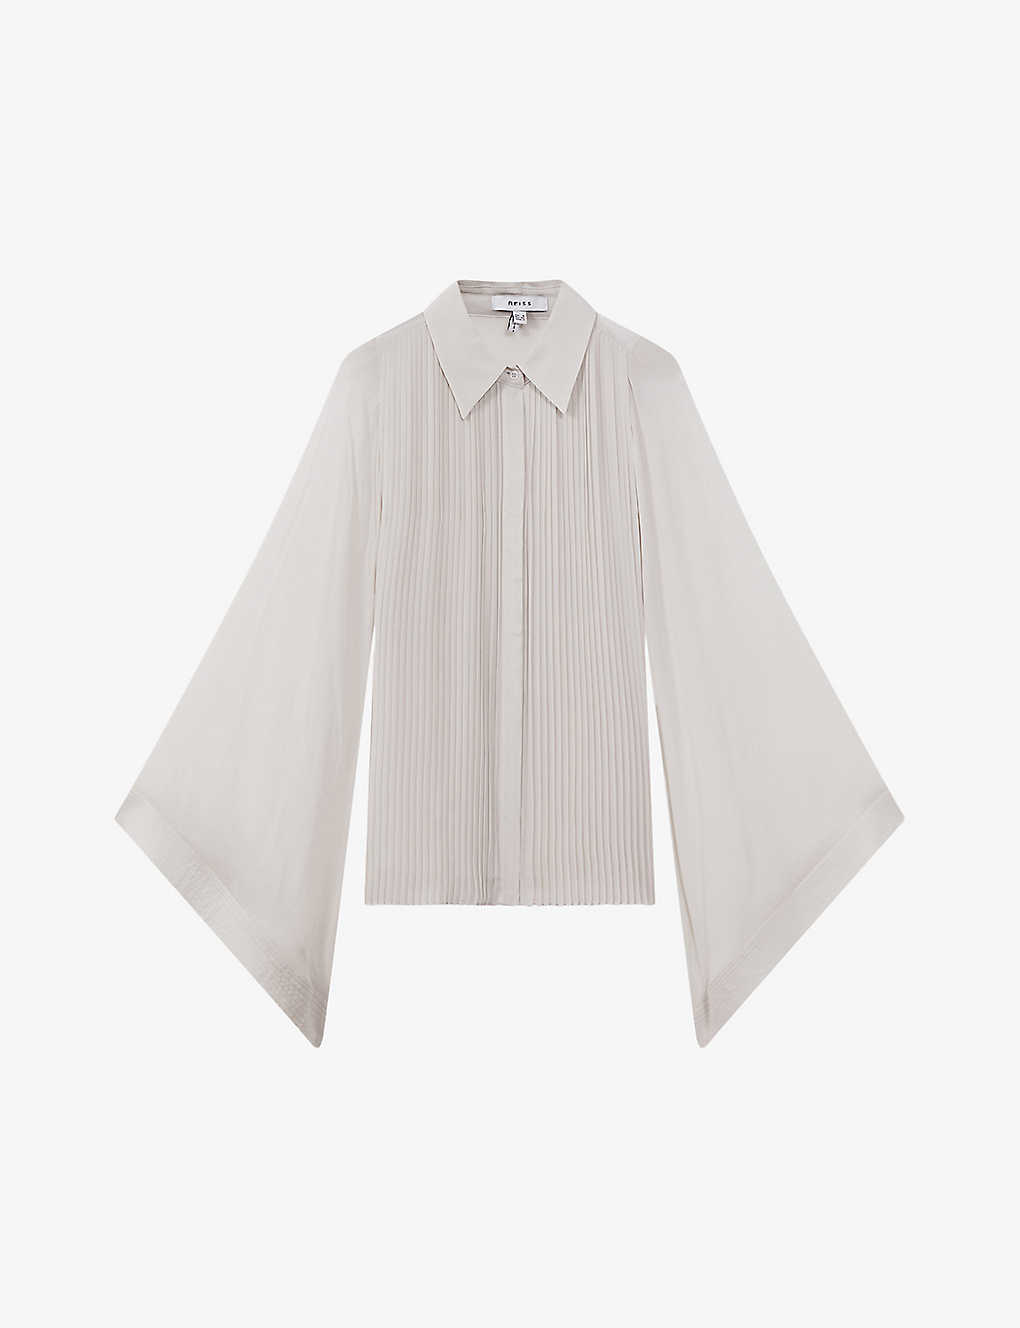 Reiss Magda - Pale Blue Pleated Flared Sleeve Blouse, Us 6